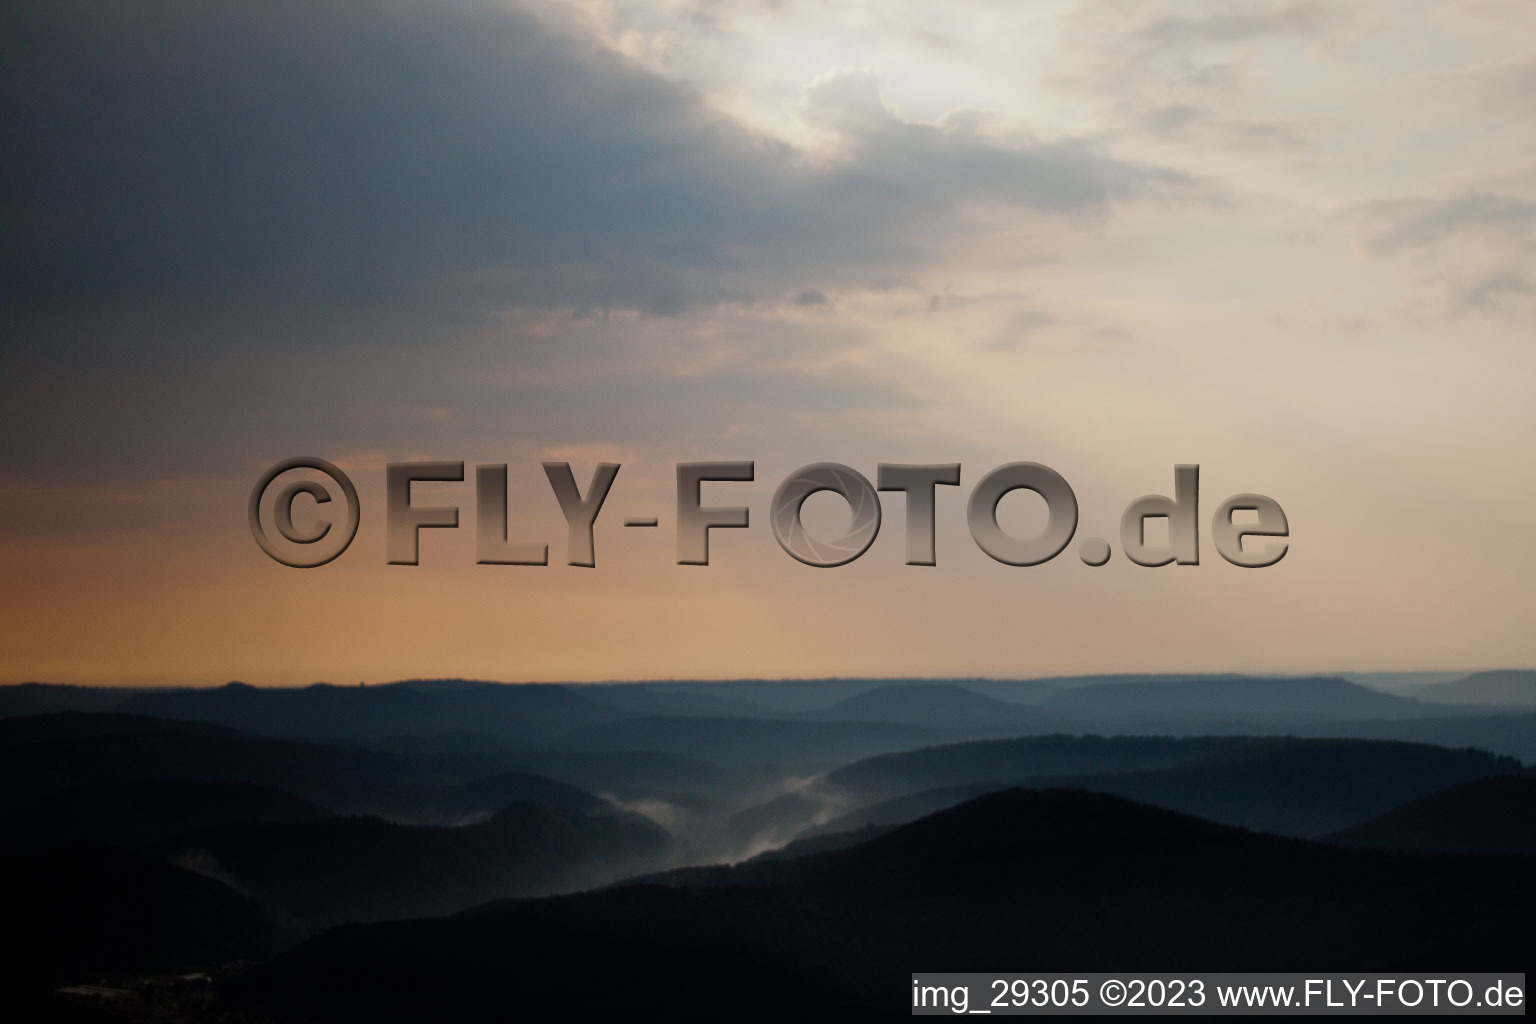 Drone image of Dahn in the state Rhineland-Palatinate, Germany